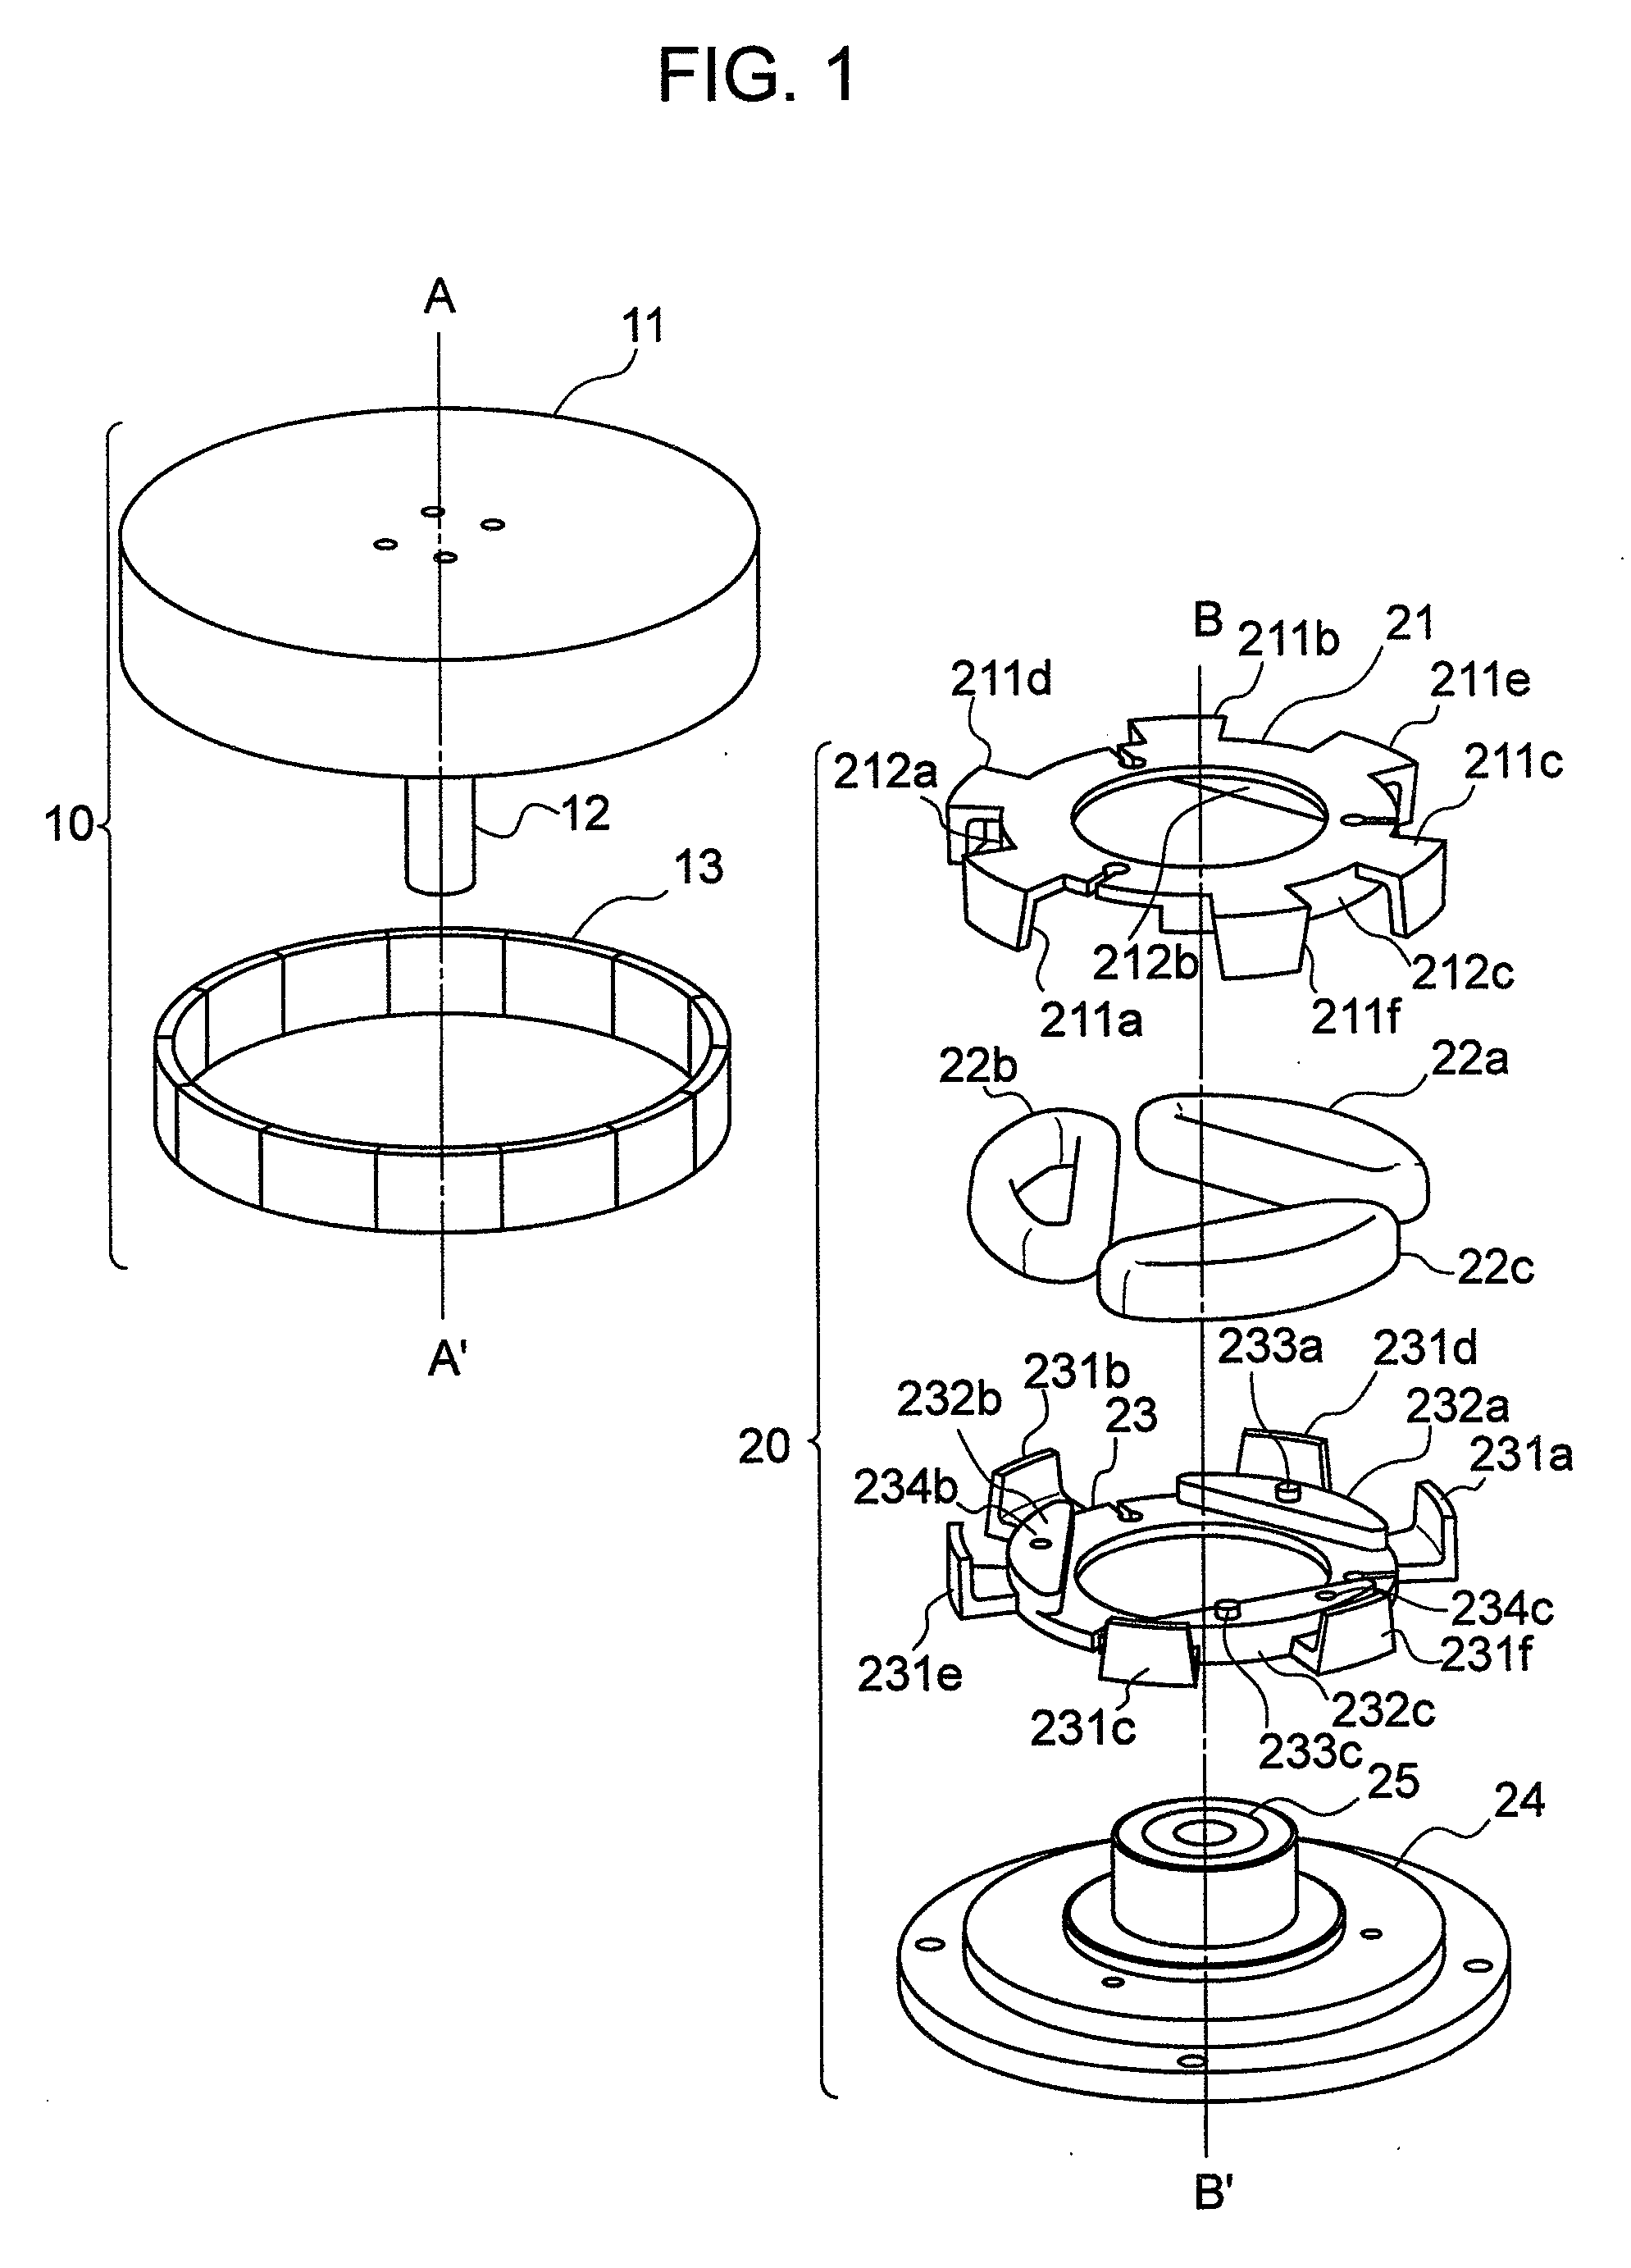 Motor and fan device using the same